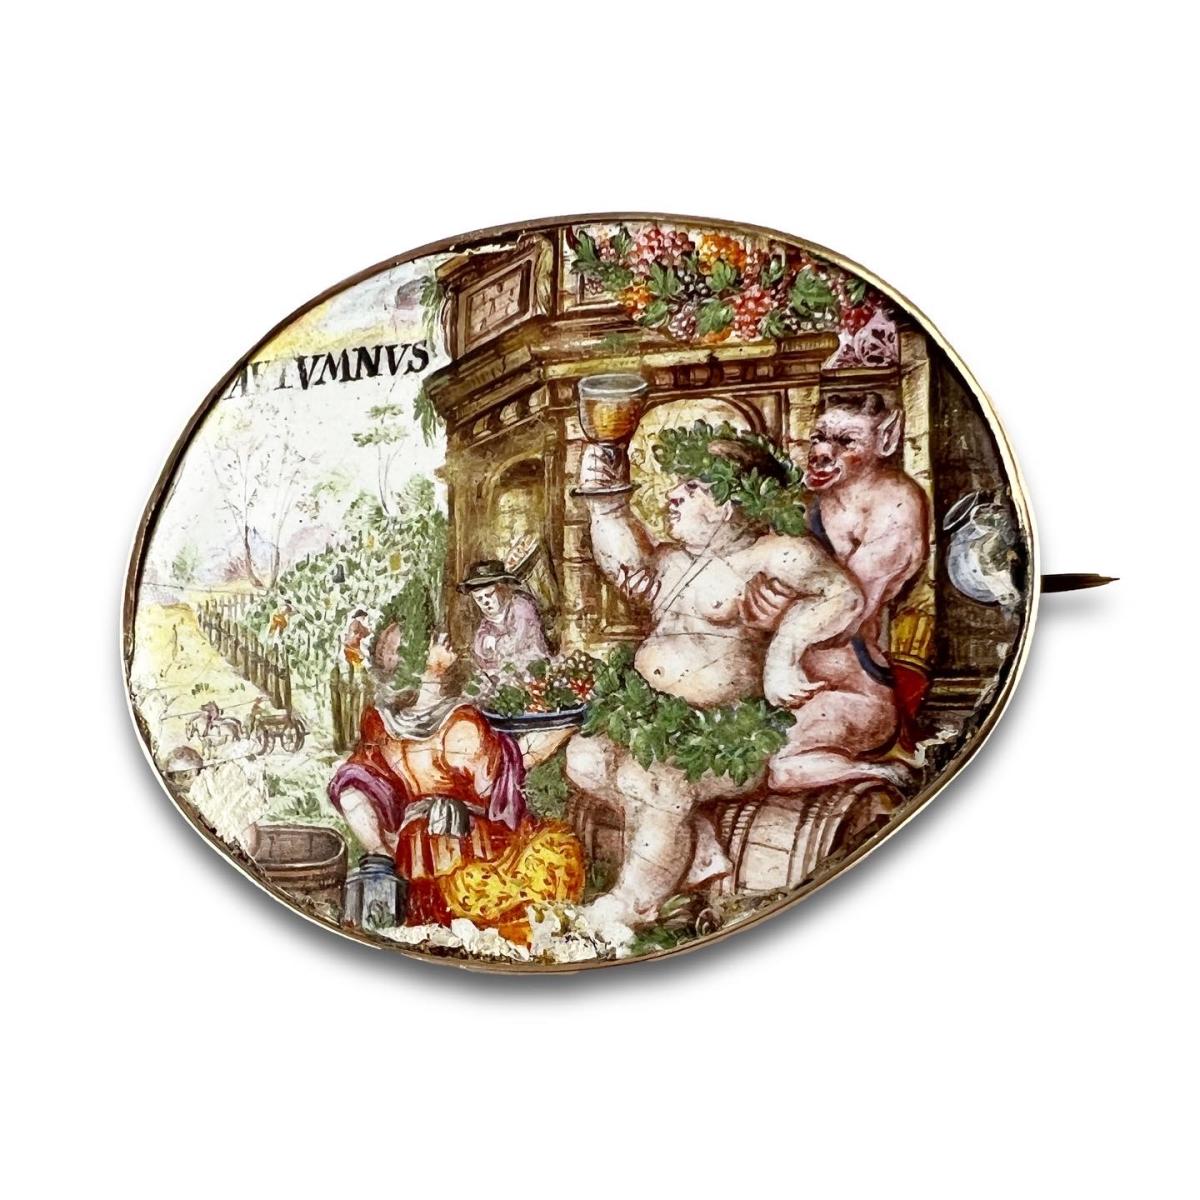 Enamel plaque depicting an allegory of Autumn. German, 17th century